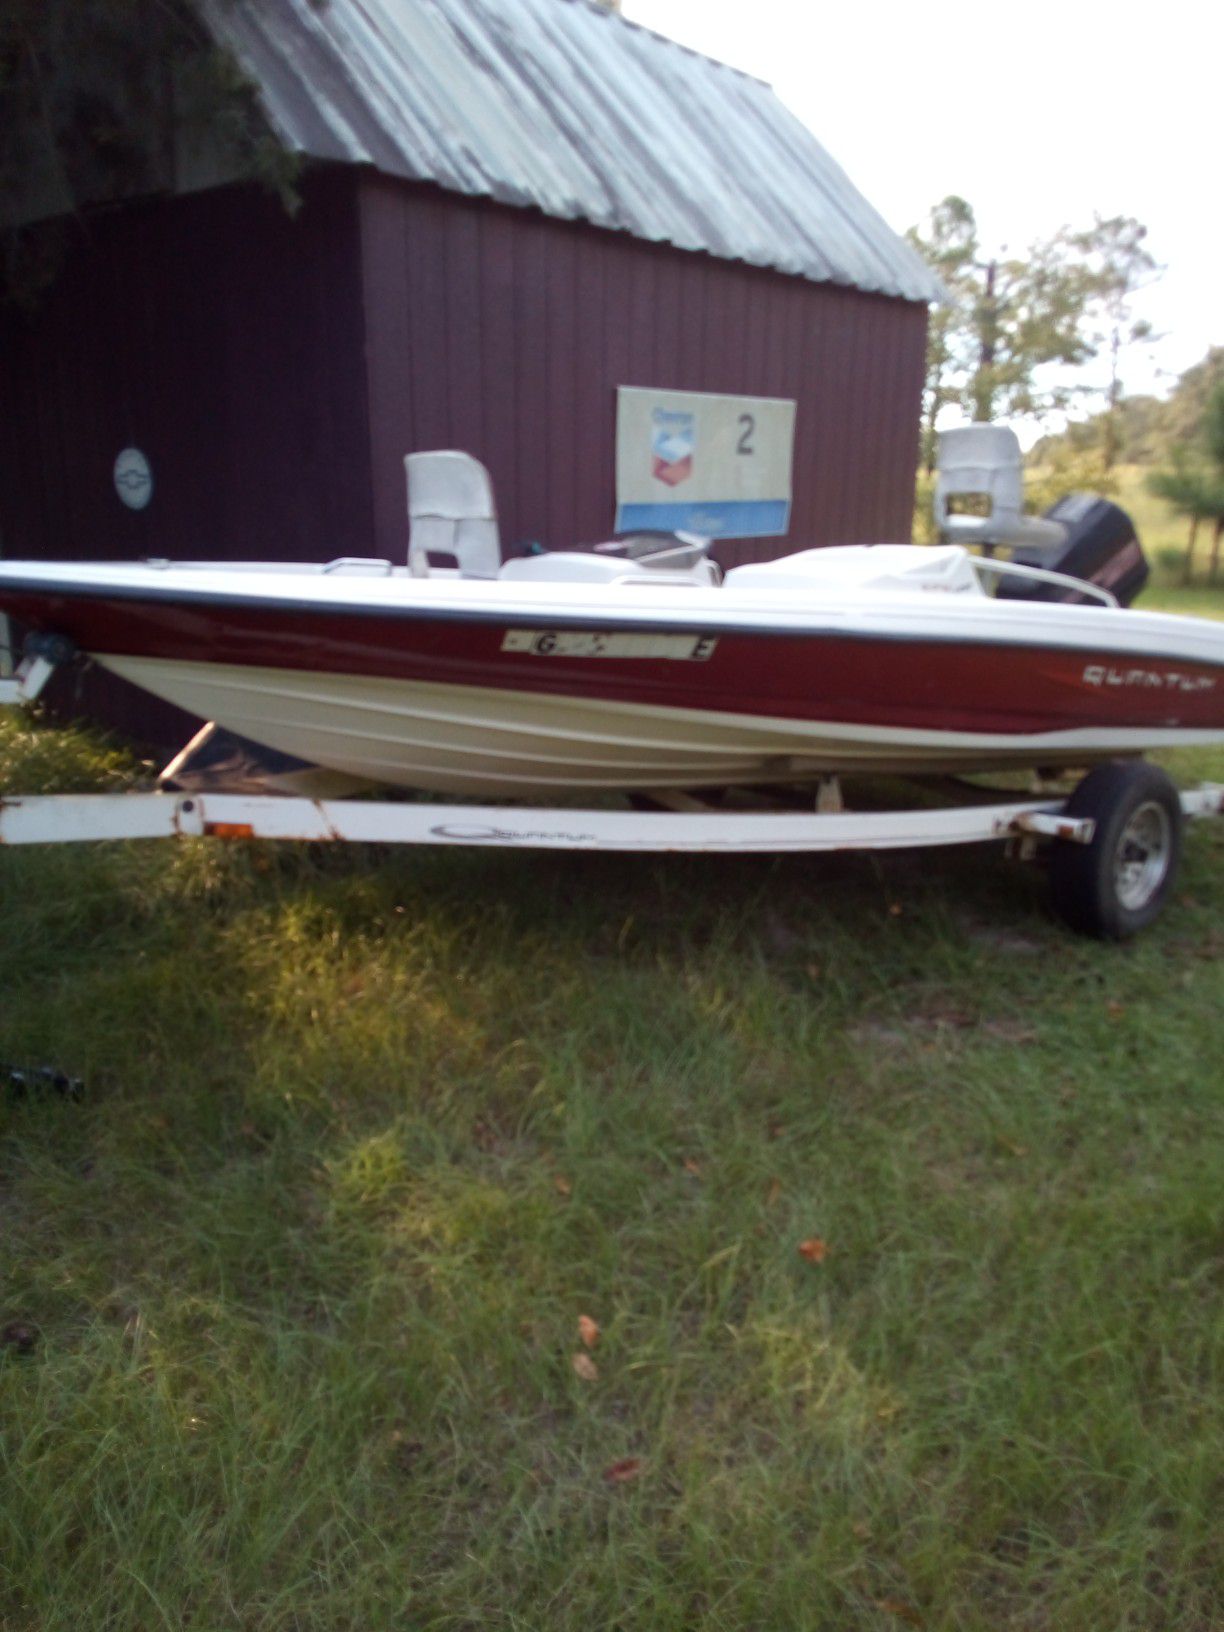 16 ft bass boat.90 hp merury force engine.Runs good 1996 model.comes with cover.new battery.Also Has Electric Tilt&Trim.And Built In Gas Tank